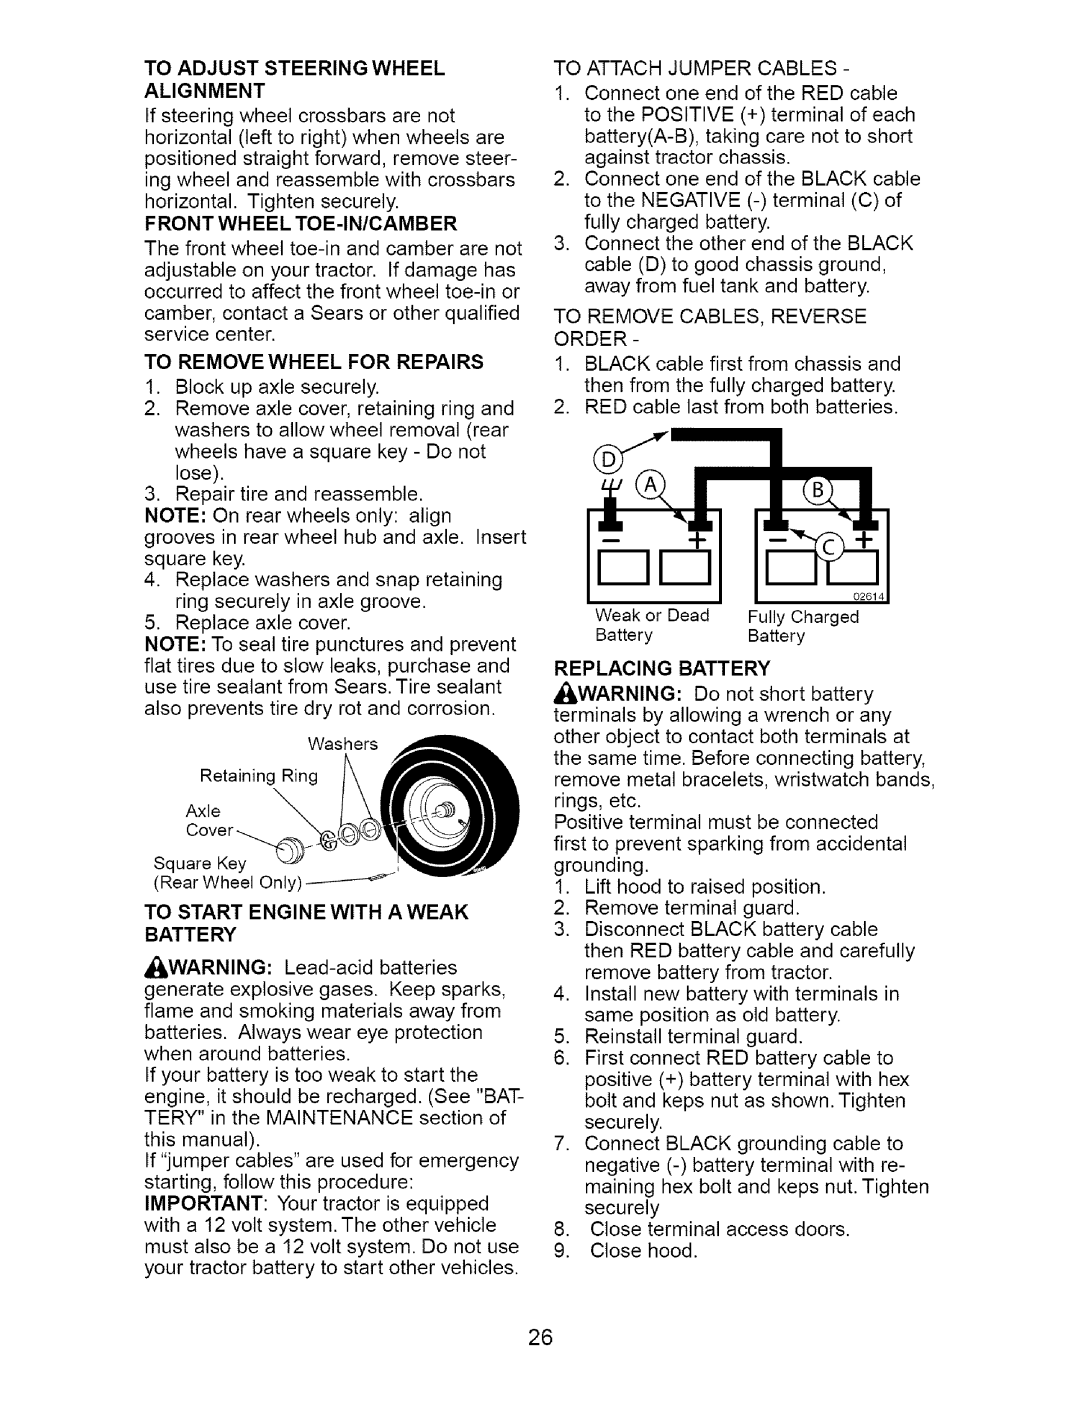 Craftsman 917.273648 manual To Adjust Steering Wheel Alignment, To Remove Wheel For Repairs, Replacing, Battery 